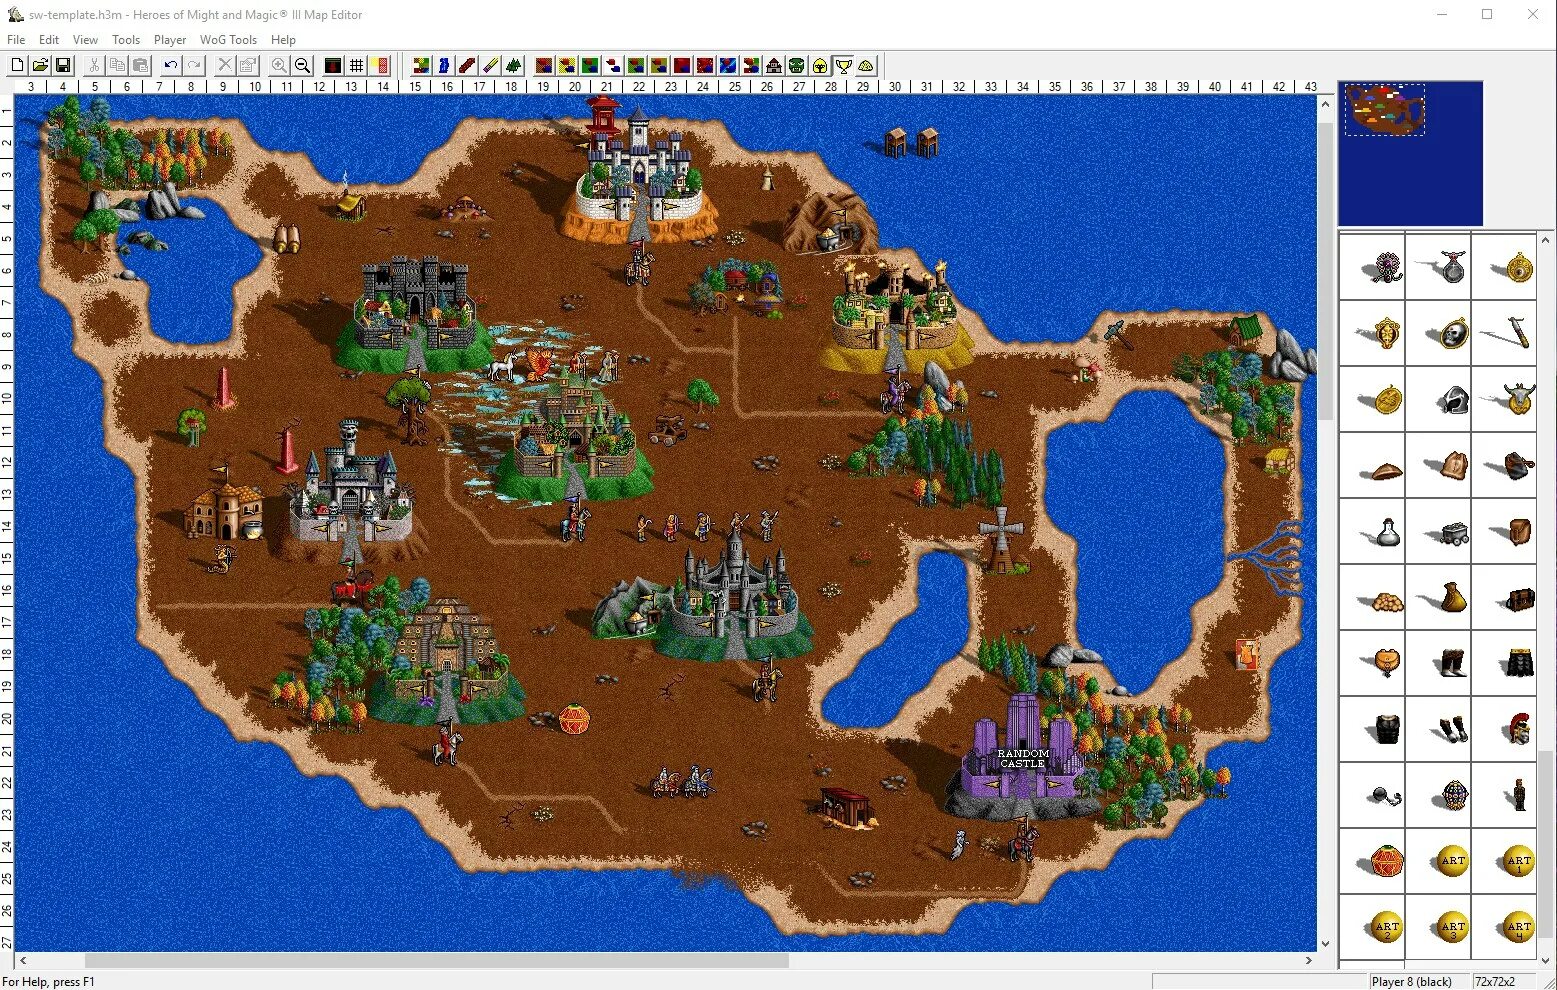 Heroes of might and Magic 3 карта. Heroes of might and Magic 2 карты. Might and Magic 1 карта. Heroes of might and Magic 6 Map.